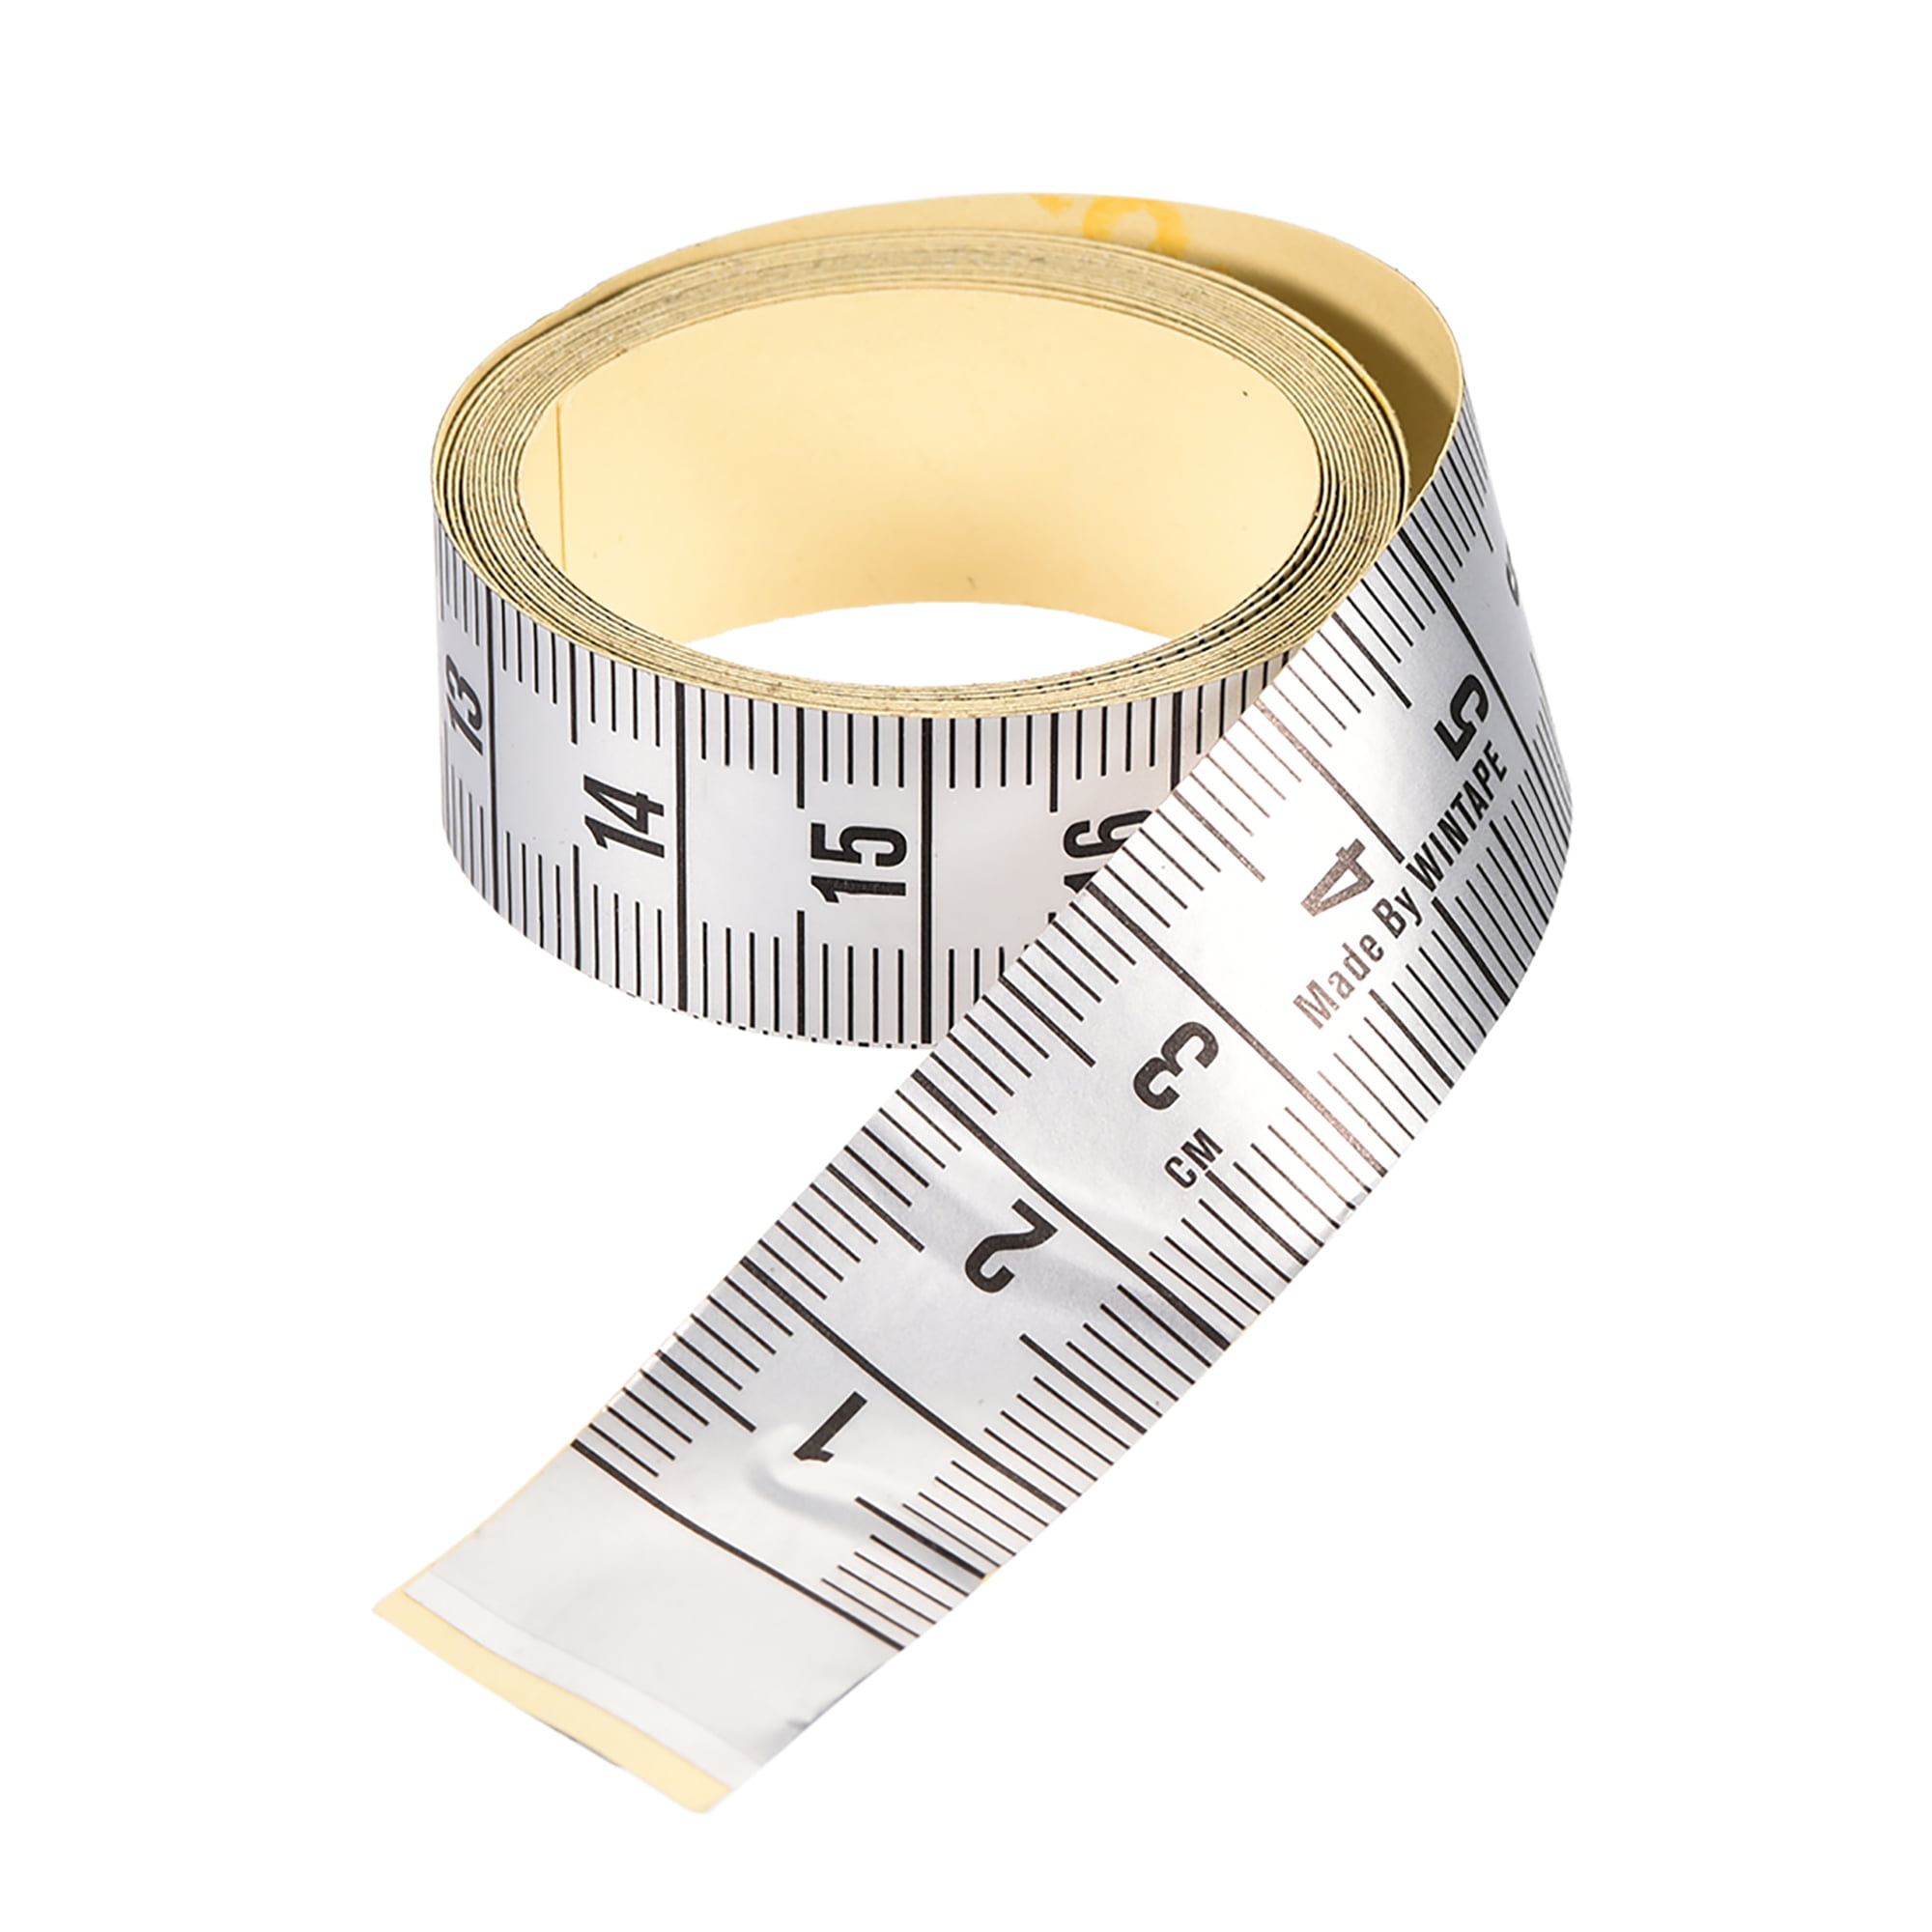 150cm Metric System Adhesive Backed Tape Measure s for Tailor Sewing